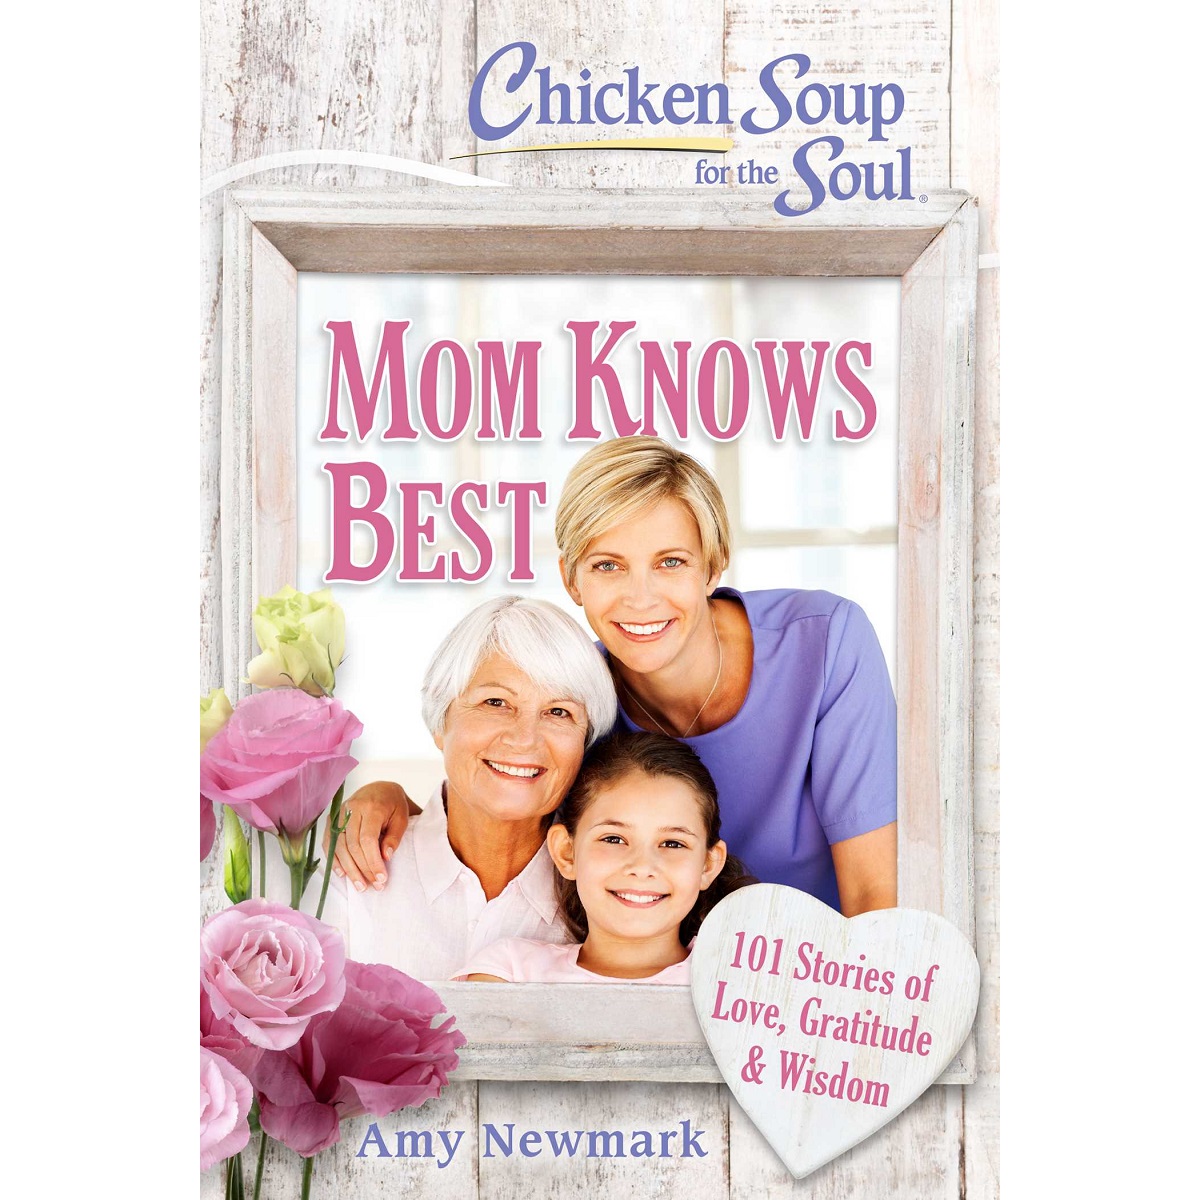 Mom Knows Best: Chicken Soup for the Soul By Amy Newmark